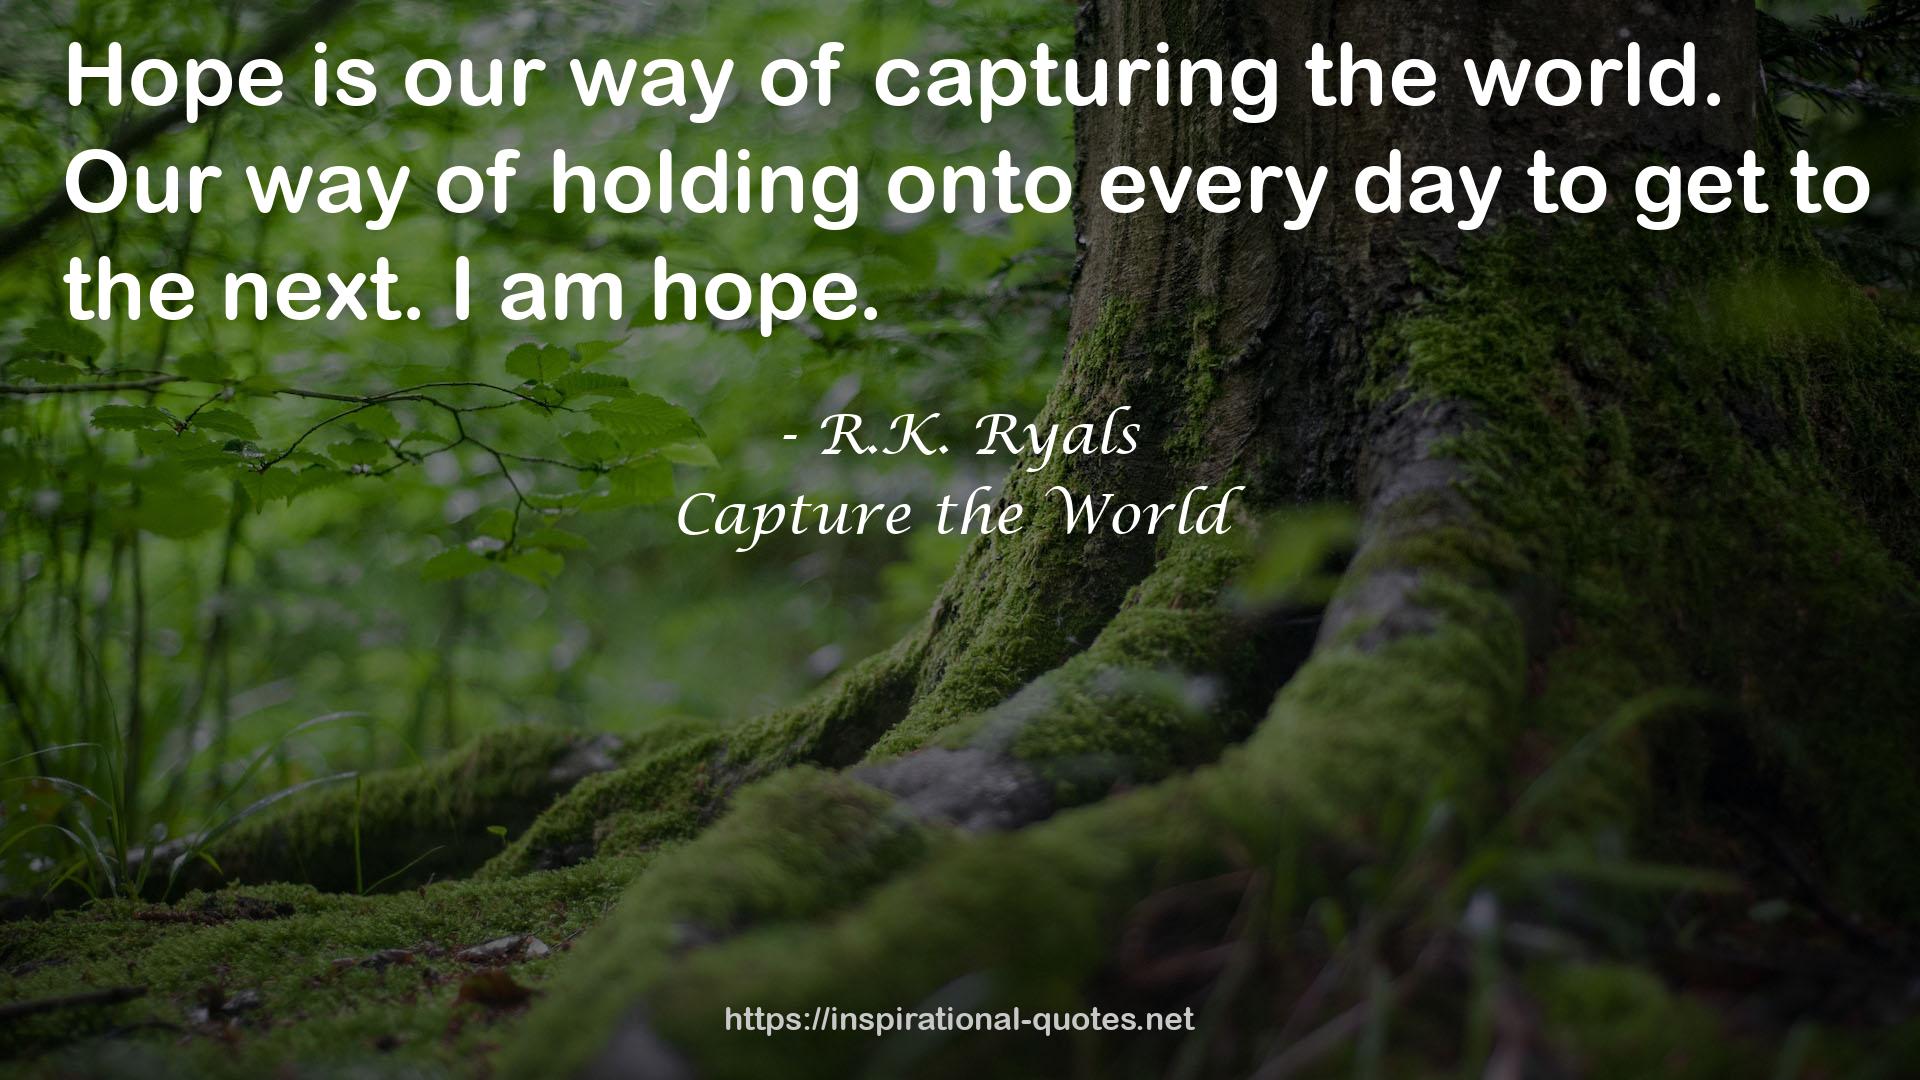 Capture the World QUOTES